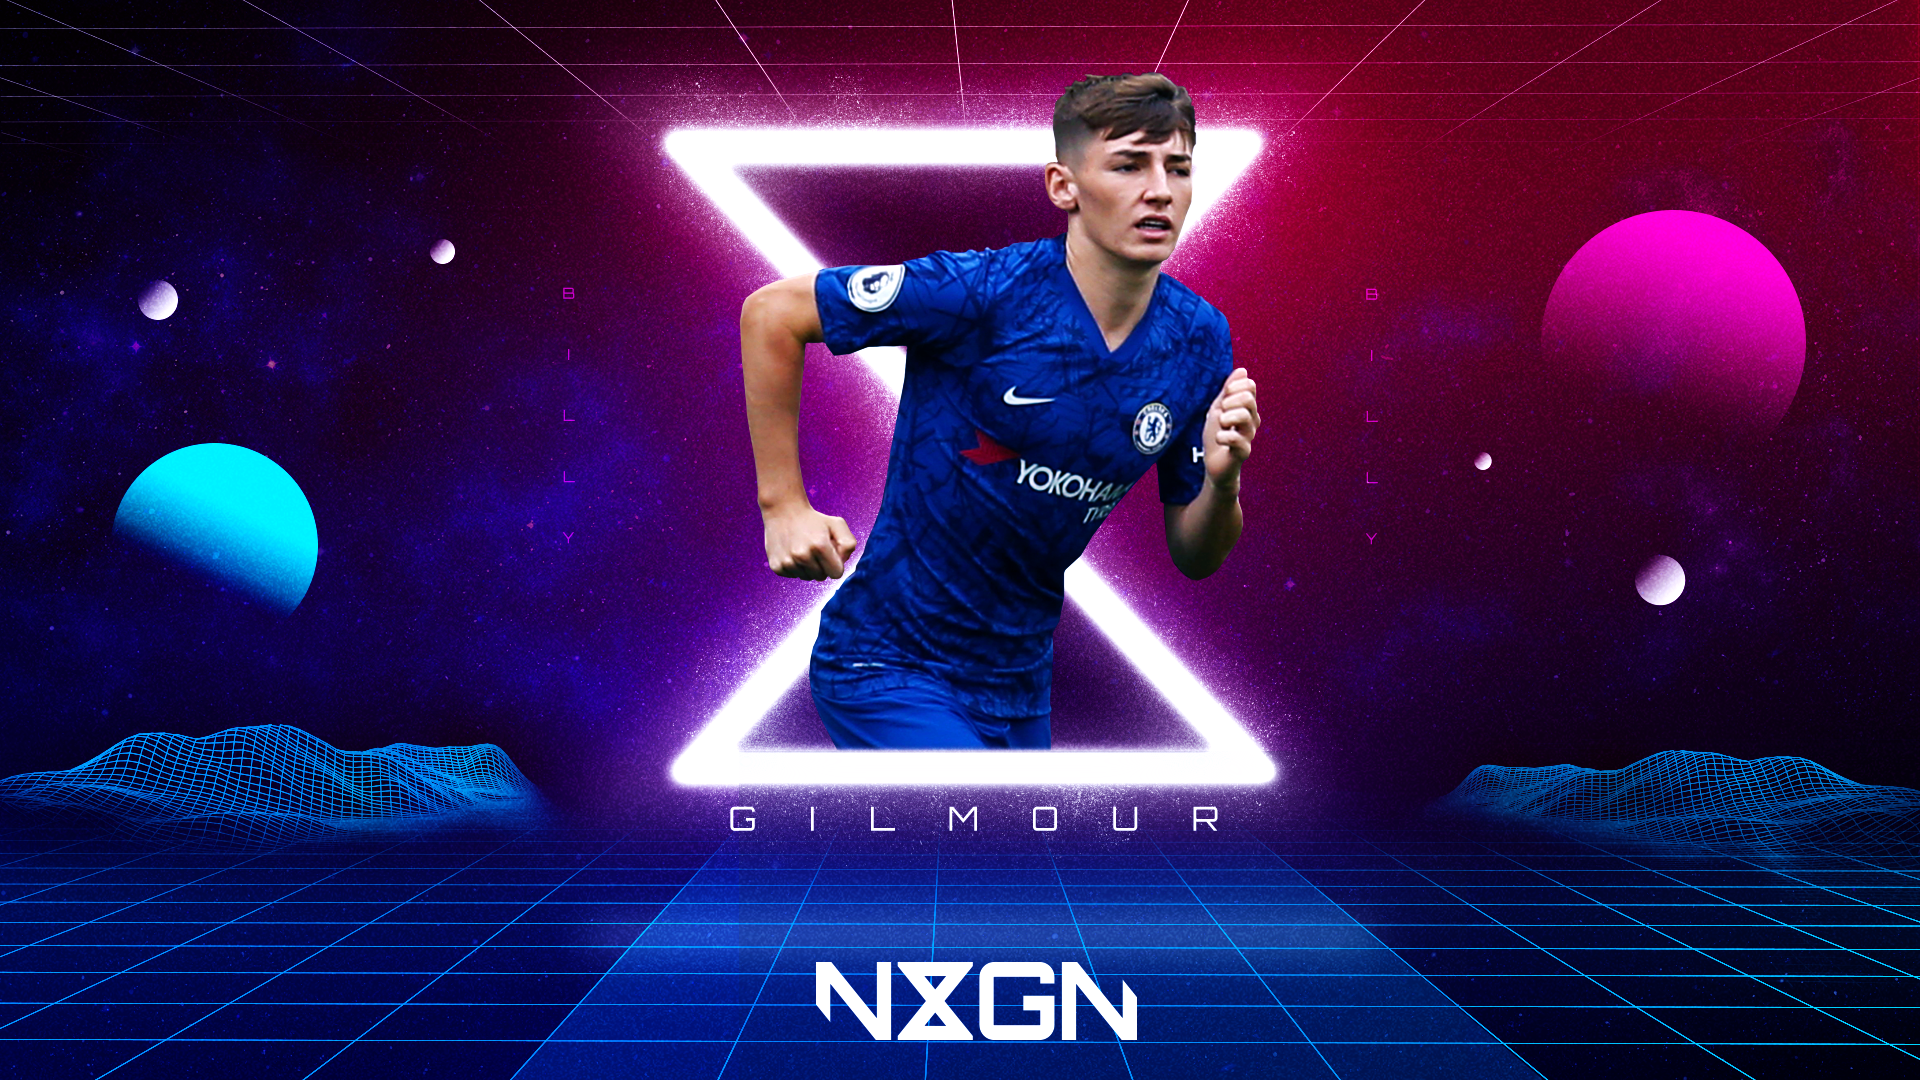 Sports Billy Gilmour HD Wallpaper